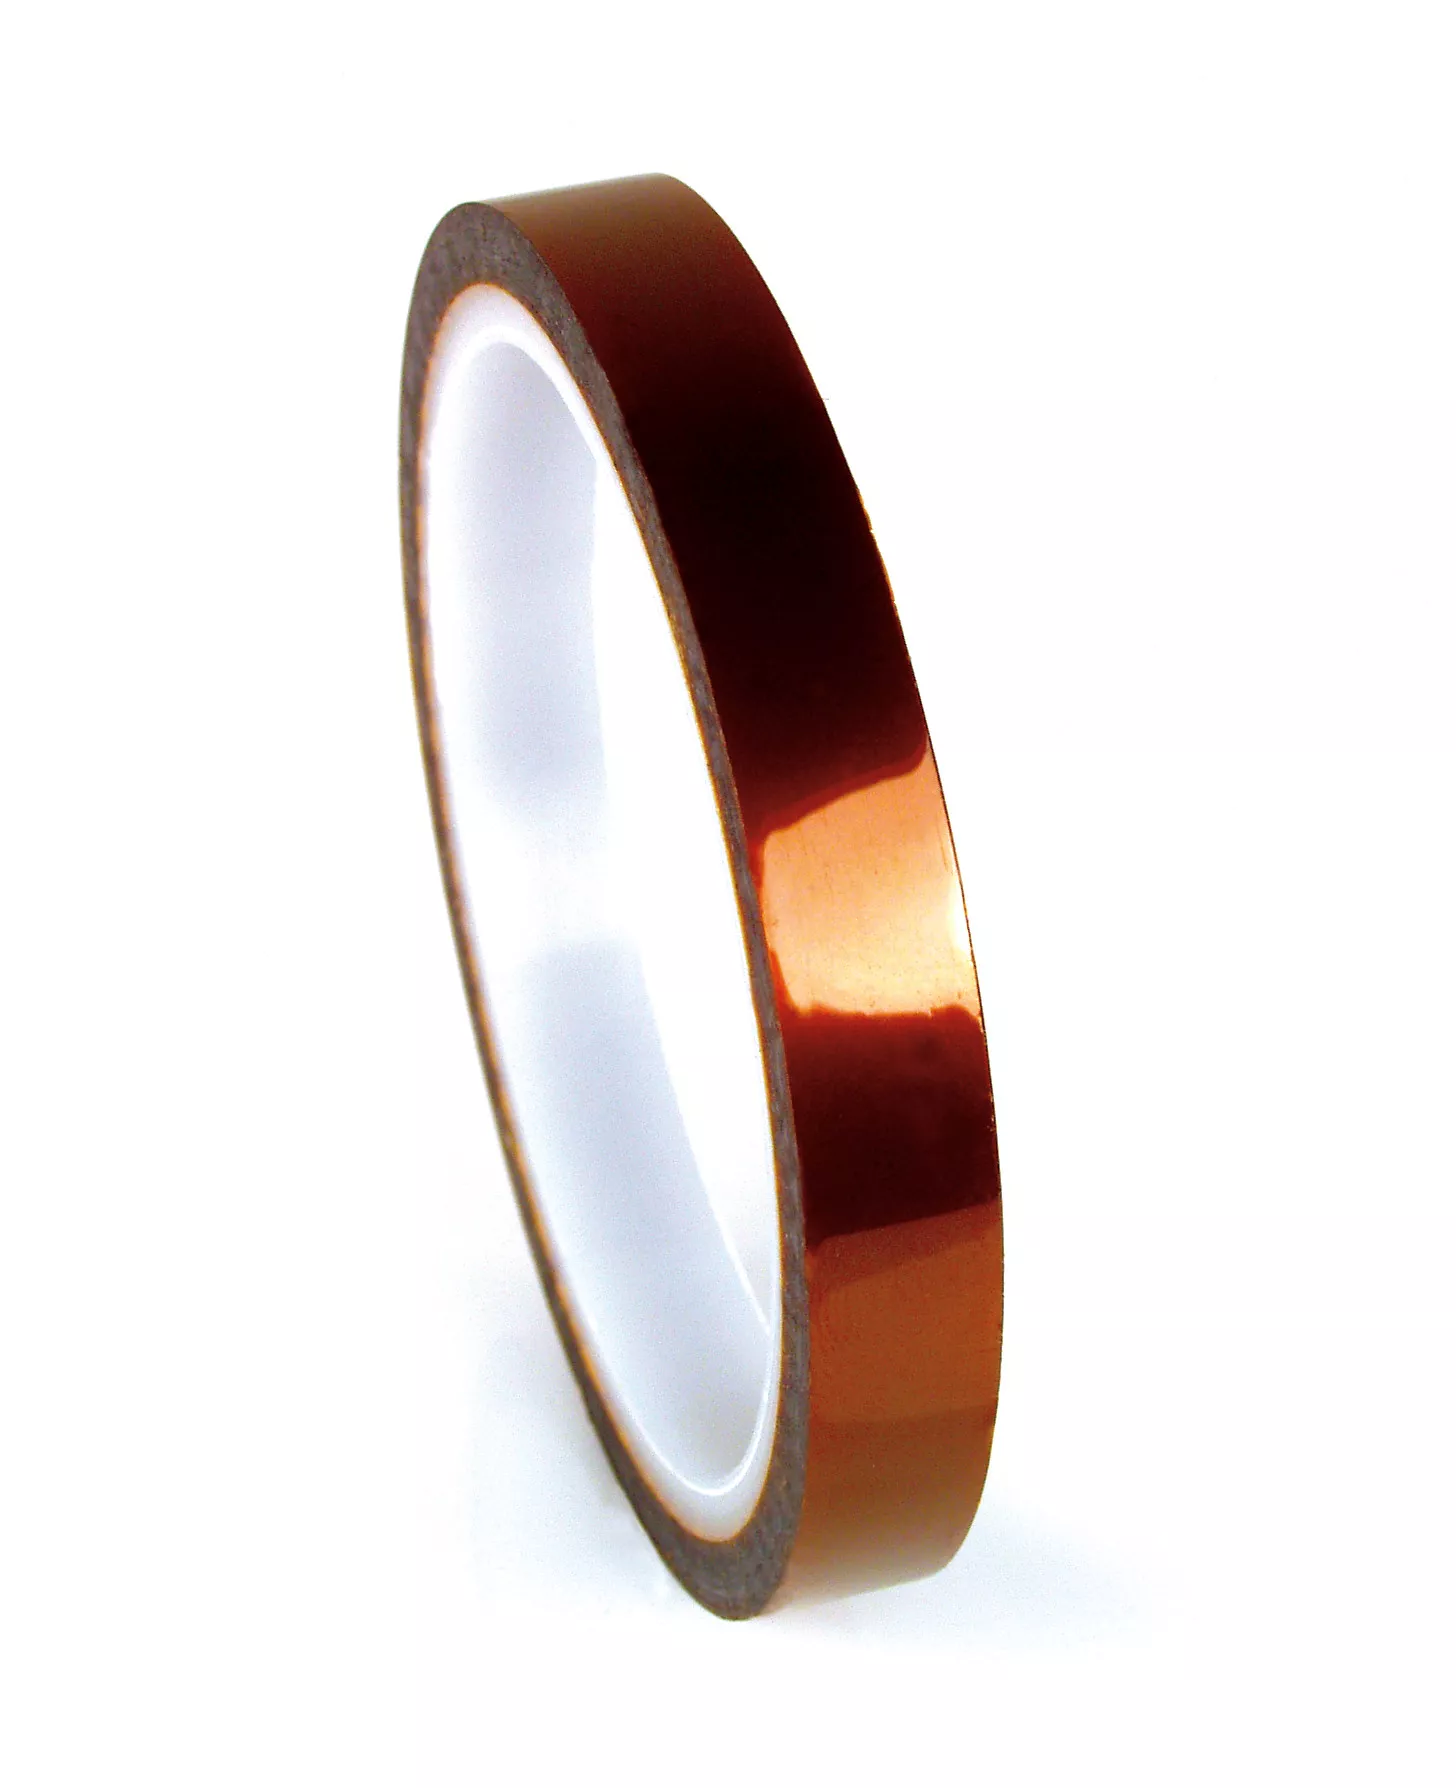 SKU 7000132703 | 3M™ Polyimide Film Electrical Tape 1205